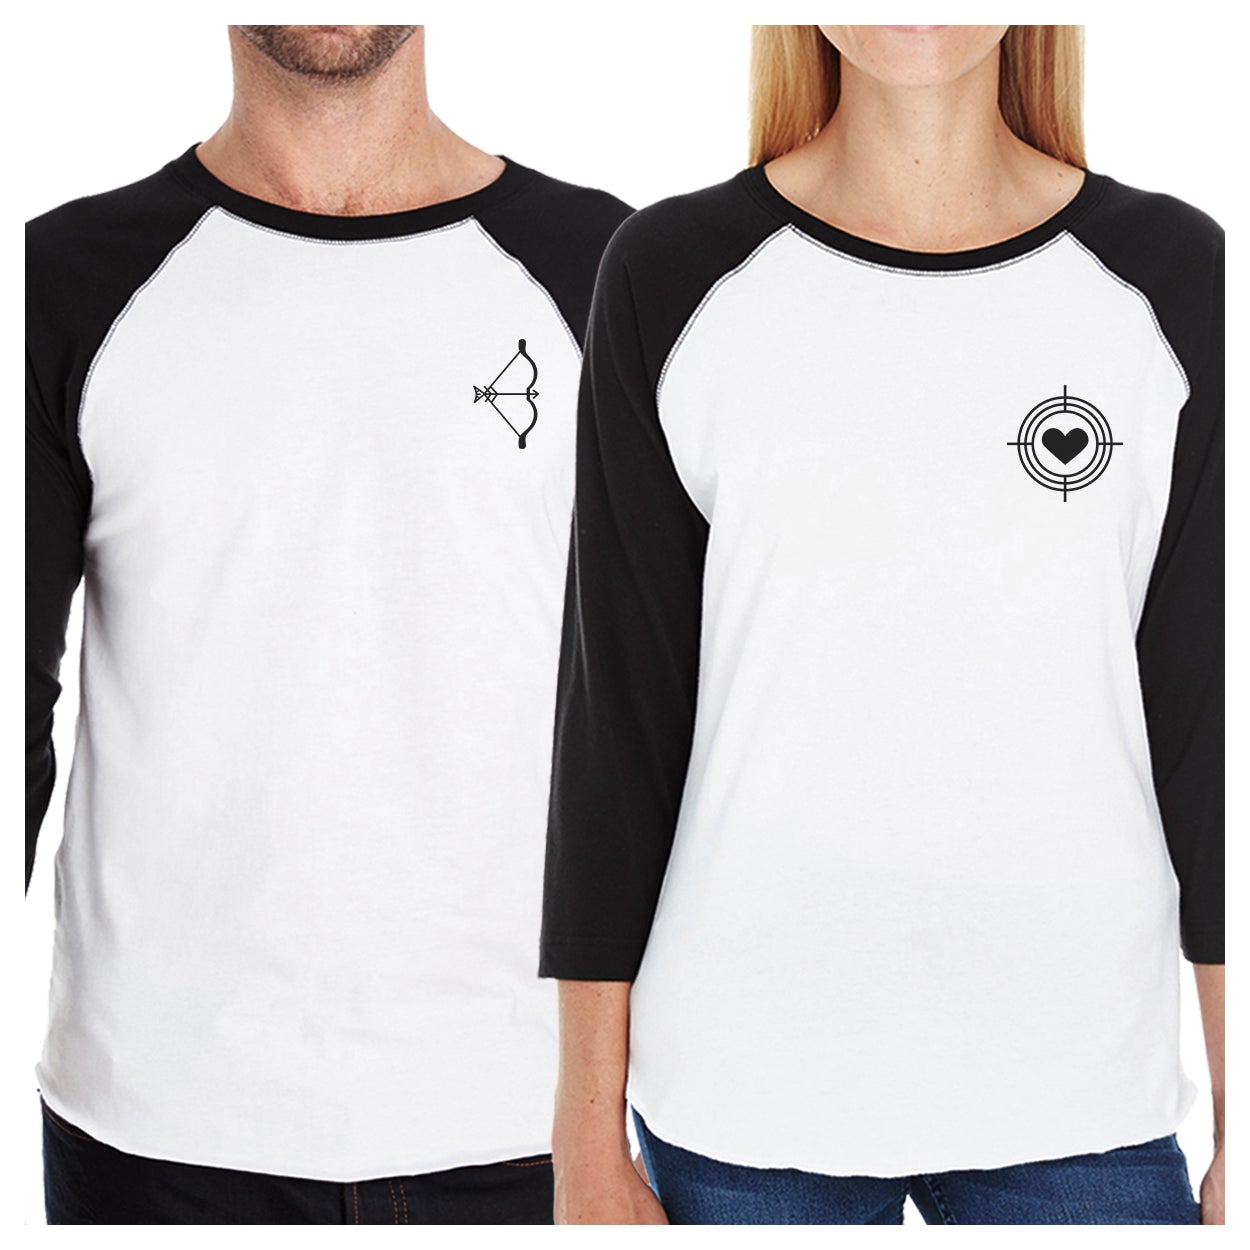 Bow And Arrow To Heart Target Matching Couple Black And White Baseball Shirts